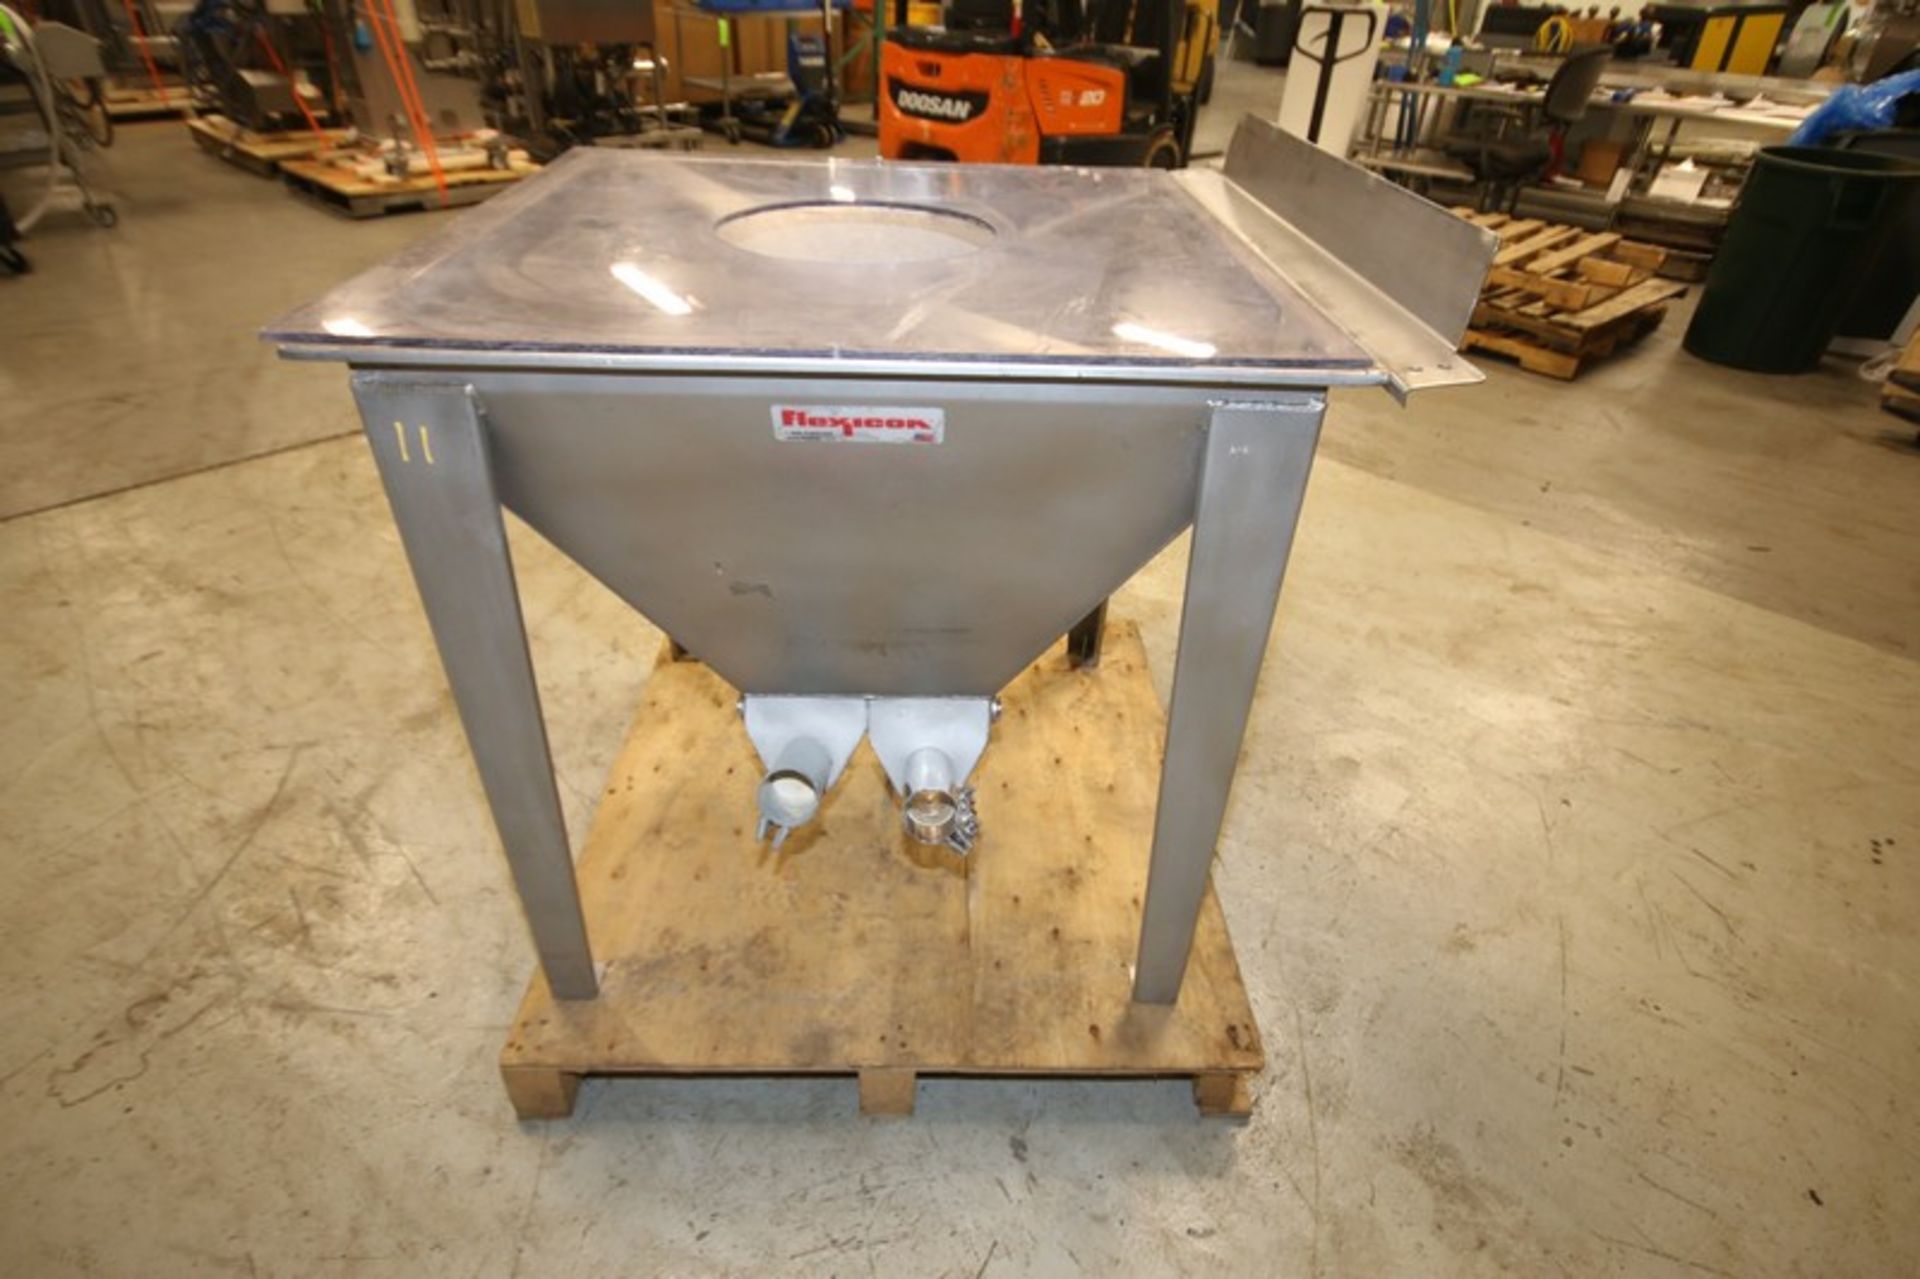 Flexicon 36" x 36" x 37" H S/S Feed Hopper with Leeson 1/2 1/3 hp Bottom Side Mixer / Drive Motor - Image 4 of 5